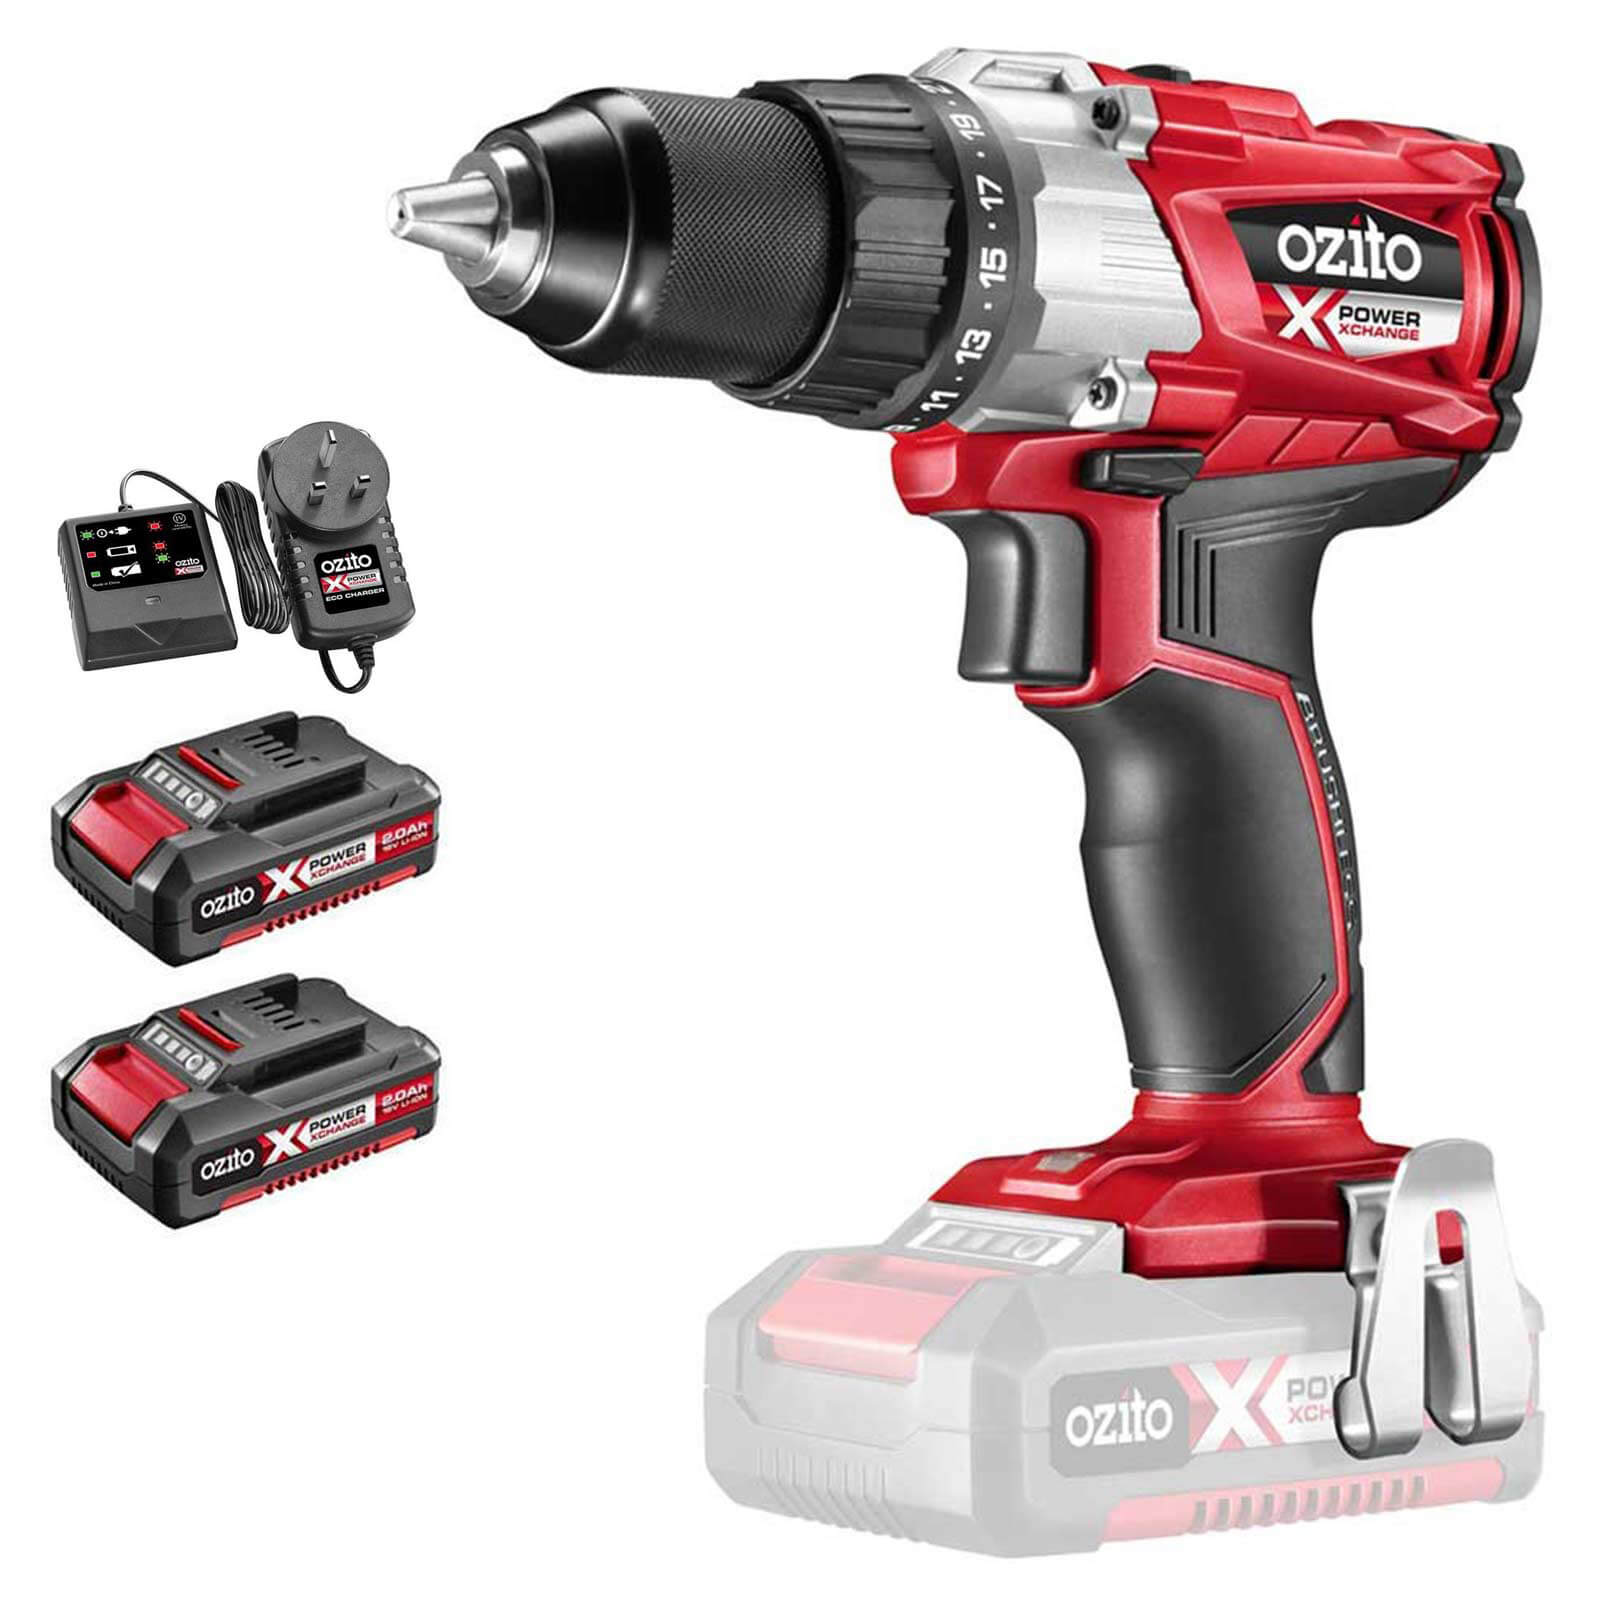 Ozito Pxbds 18v Cordless Brushless Drill Driver 2 X 2ah Li Ion Charger No Case